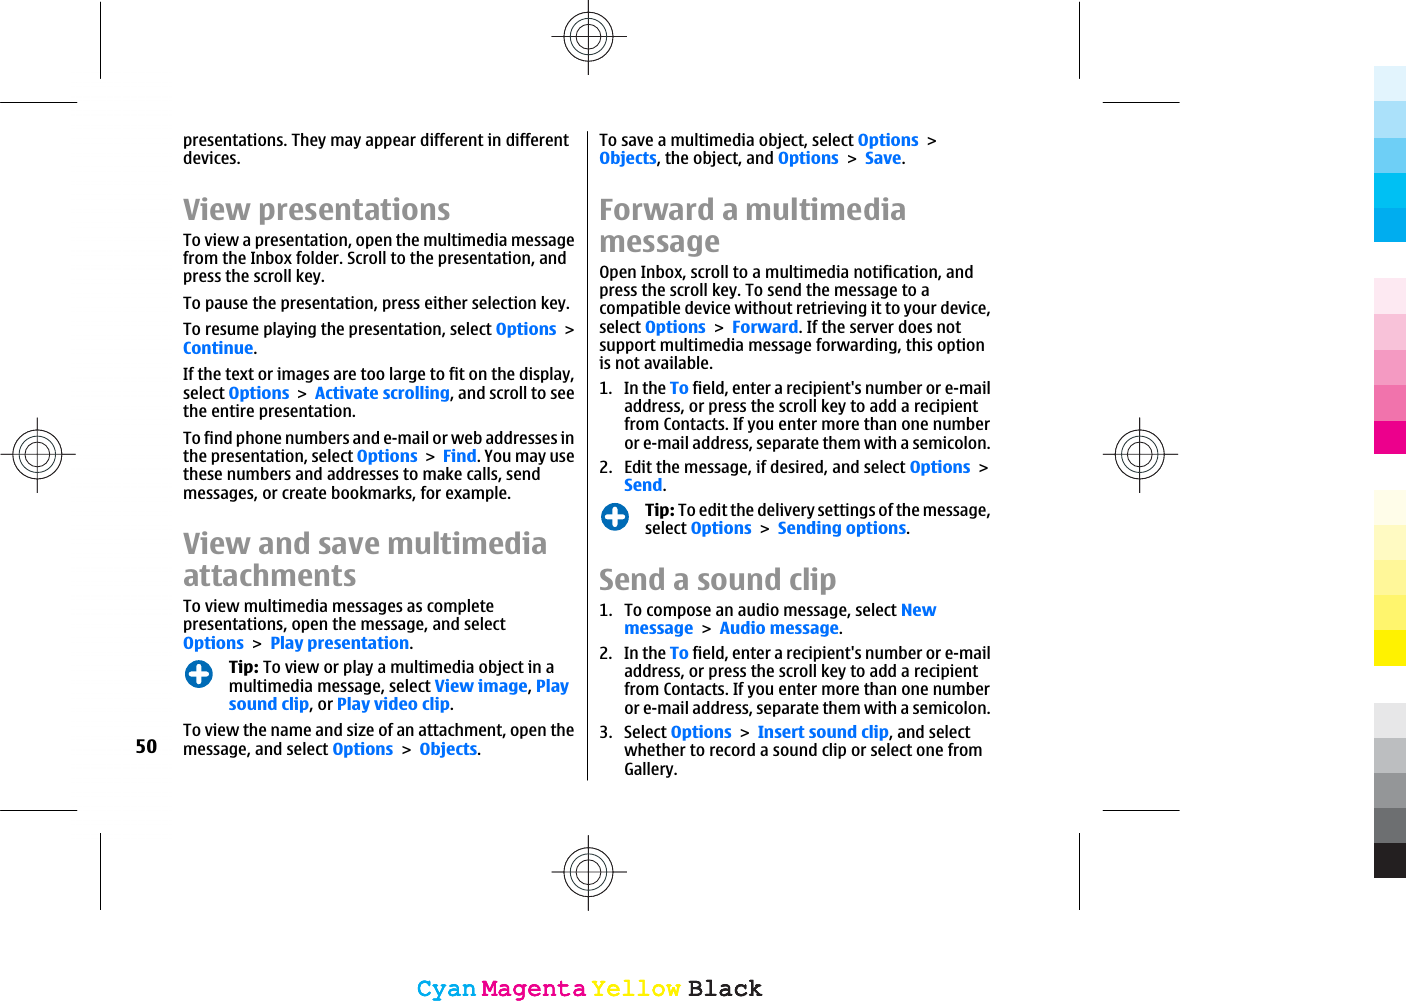 presentations. They may appear different in differentdevices.View presentationsTo view a presentation, open the multimedia messagefrom the Inbox folder. Scroll to the presentation, andpress the scroll key.To pause the presentation, press either selection key.To resume playing the presentation, select OptionsContinue.If the text or images are too large to fit on the display,select OptionsActivate scrolling, and scroll to seethe entire presentation.To find phone numbers and e-mail or web addresses inthe presentation, select OptionsFind. You may usethese numbers and addresses to make calls, sendmessages, or create bookmarks, for example.View and save multimediaattachmentsTo view multimedia messages as completepresentations, open the message, and selectOptionsPlay presentation.Tip: To view or play a multimedia object in amultimedia message, select View image,Playsound clip, or Play video clip.To view the name and size of an attachment, open themessage, and select OptionsObjects.To save a multimedia object, select OptionsObjects, the object, and OptionsSave.Forward a multimediamessageOpen Inbox, scroll to a multimedia notification, andpress the scroll key. To send the message to acompatible device without retrieving it to your device,select OptionsForward. If the server does notsupport multimedia message forwarding, this optionis not available.1. In the To field, enter a recipient&apos;s number or e-mailaddress, or press the scroll key to add a recipientfrom Contacts. If you enter more than one numberor e-mail address, separate them with a semicolon.2. Edit the message, if desired, and select OptionsSend.Tip: To edit the delivery settings of the message,select OptionsSending options.Send a sound clip1. To compose an audio message, select NewmessageAudio message.2. In the To field, enter a recipient&apos;s number or e-mailaddress, or press the scroll key to add a recipientfrom Contacts. If you enter more than one numberor e-mail address, separate them with a semicolon.3. Select OptionsInsert sound clip, and selectwhether to record a sound clip or select one fromGallery.50CyanCyanMagentaMagentaYellowYellowBlackBlackCyanCyanMagentaMagentaYellowYellowBlackBlack